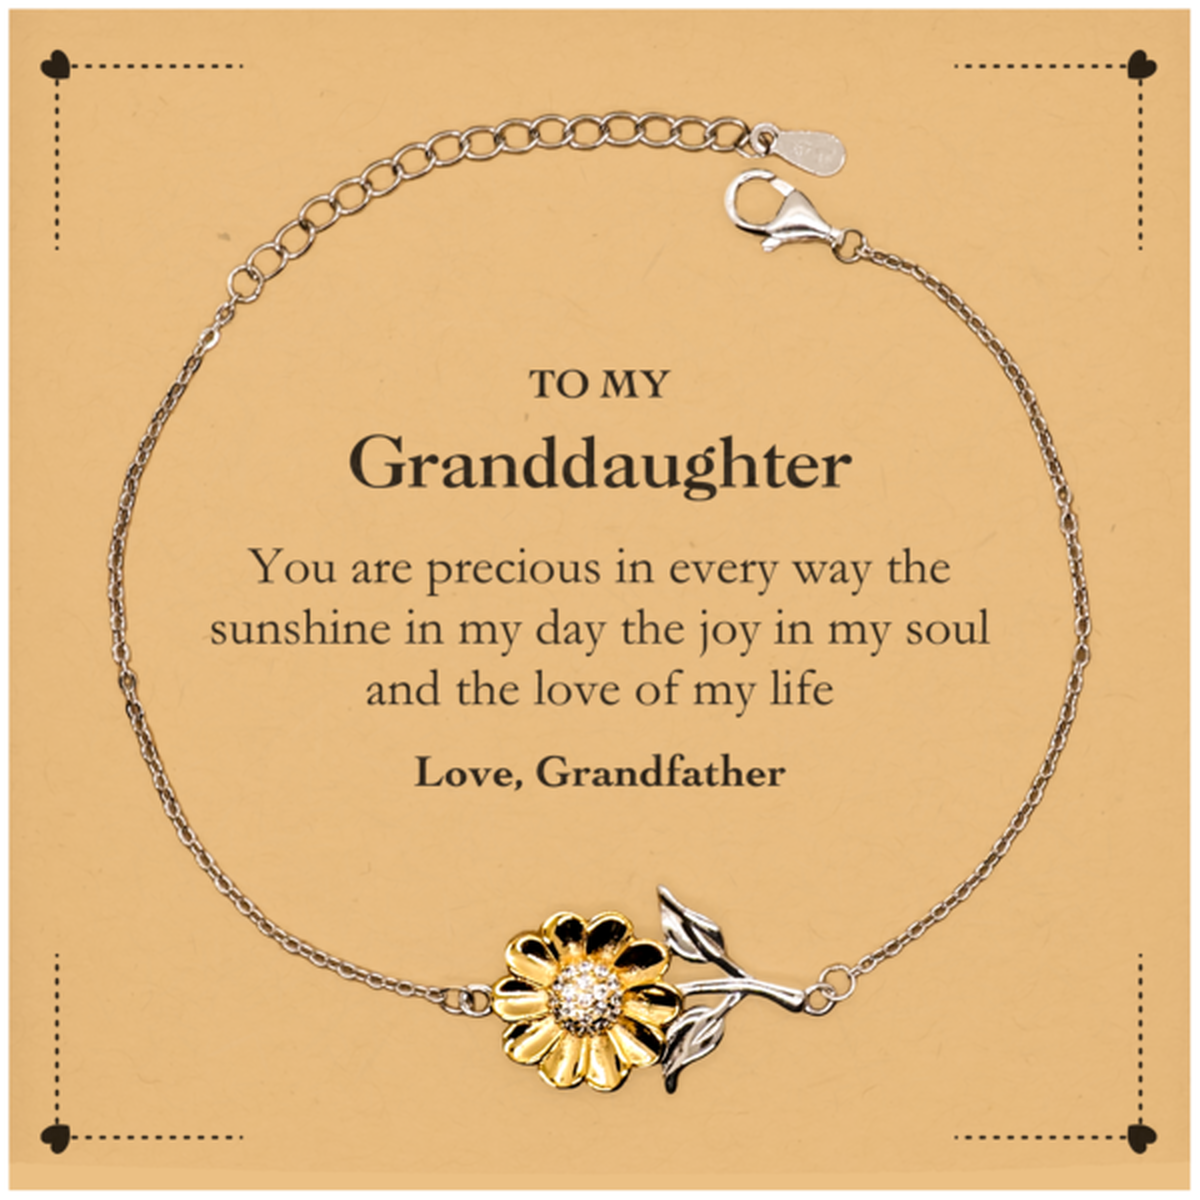 Graduation Gifts for Granddaughter Sunflower Bracelet Present from Grandfather, Christmas Granddaughter Birthday Gifts Granddaughter You are precious in every way the sunshine in my day. Love, Grandfather